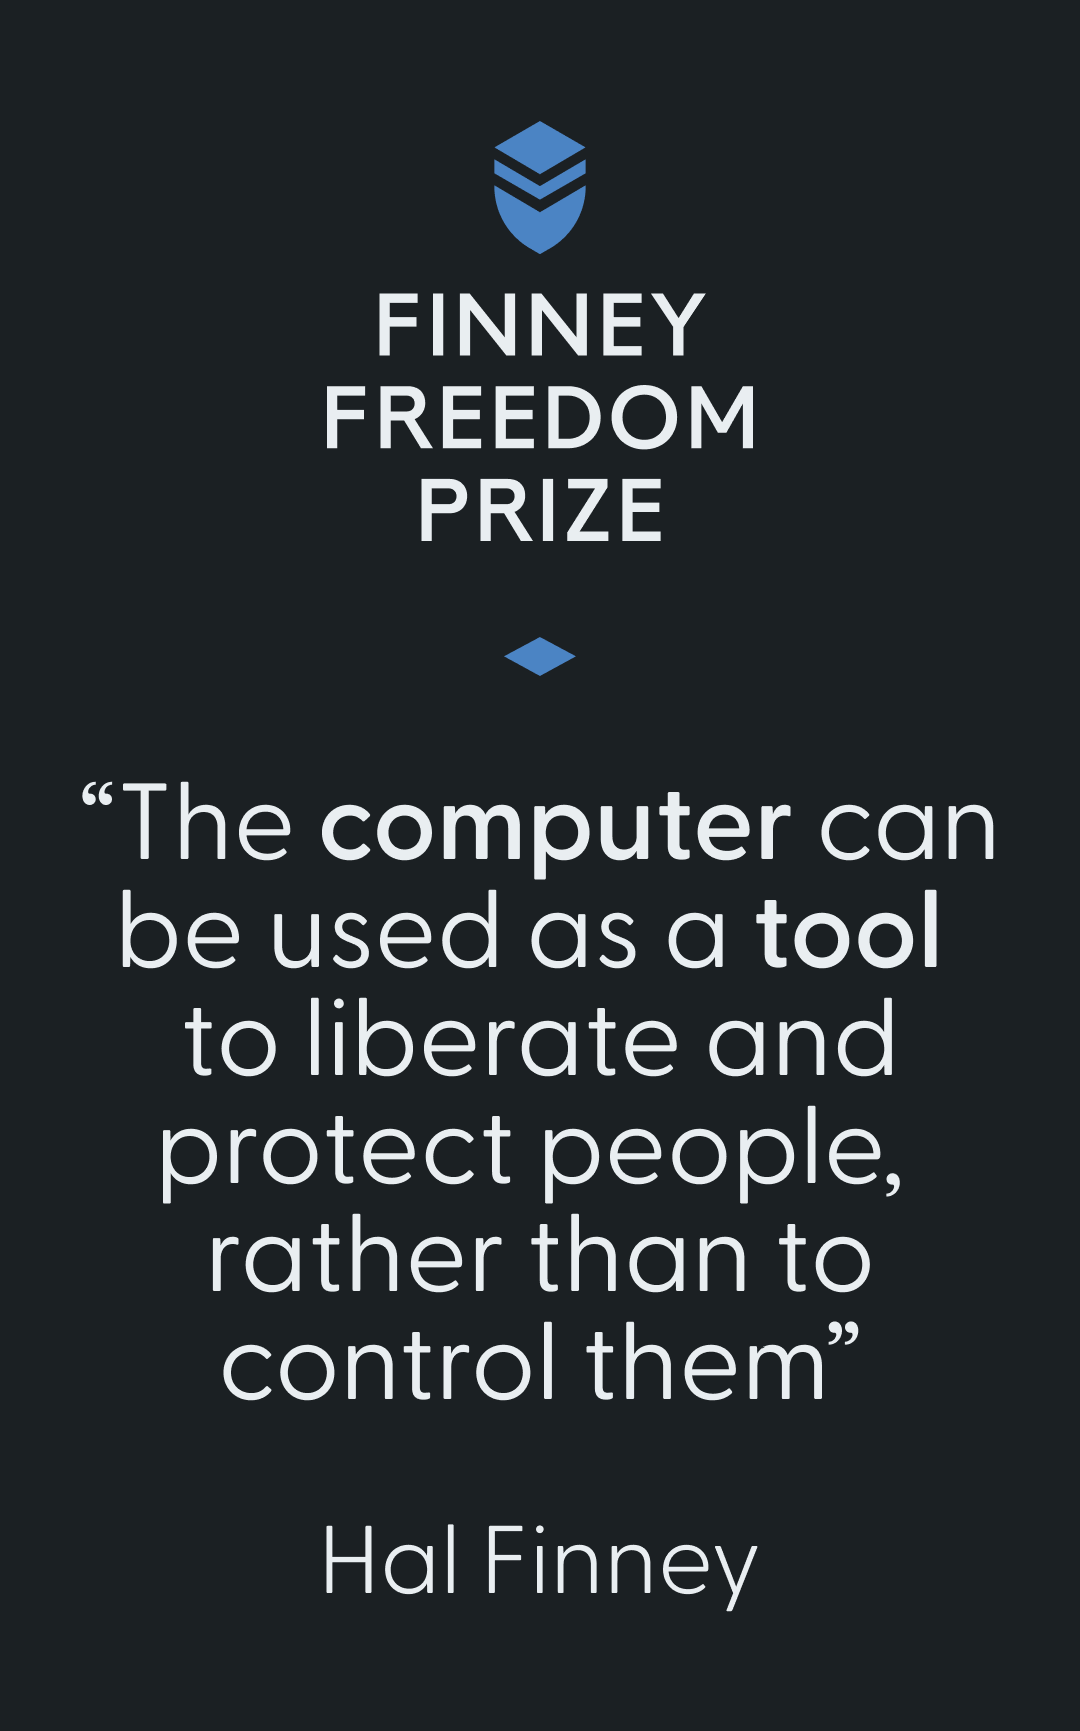 “The computer can be used as a tool  to liberate and protect people,  rather than to control them”